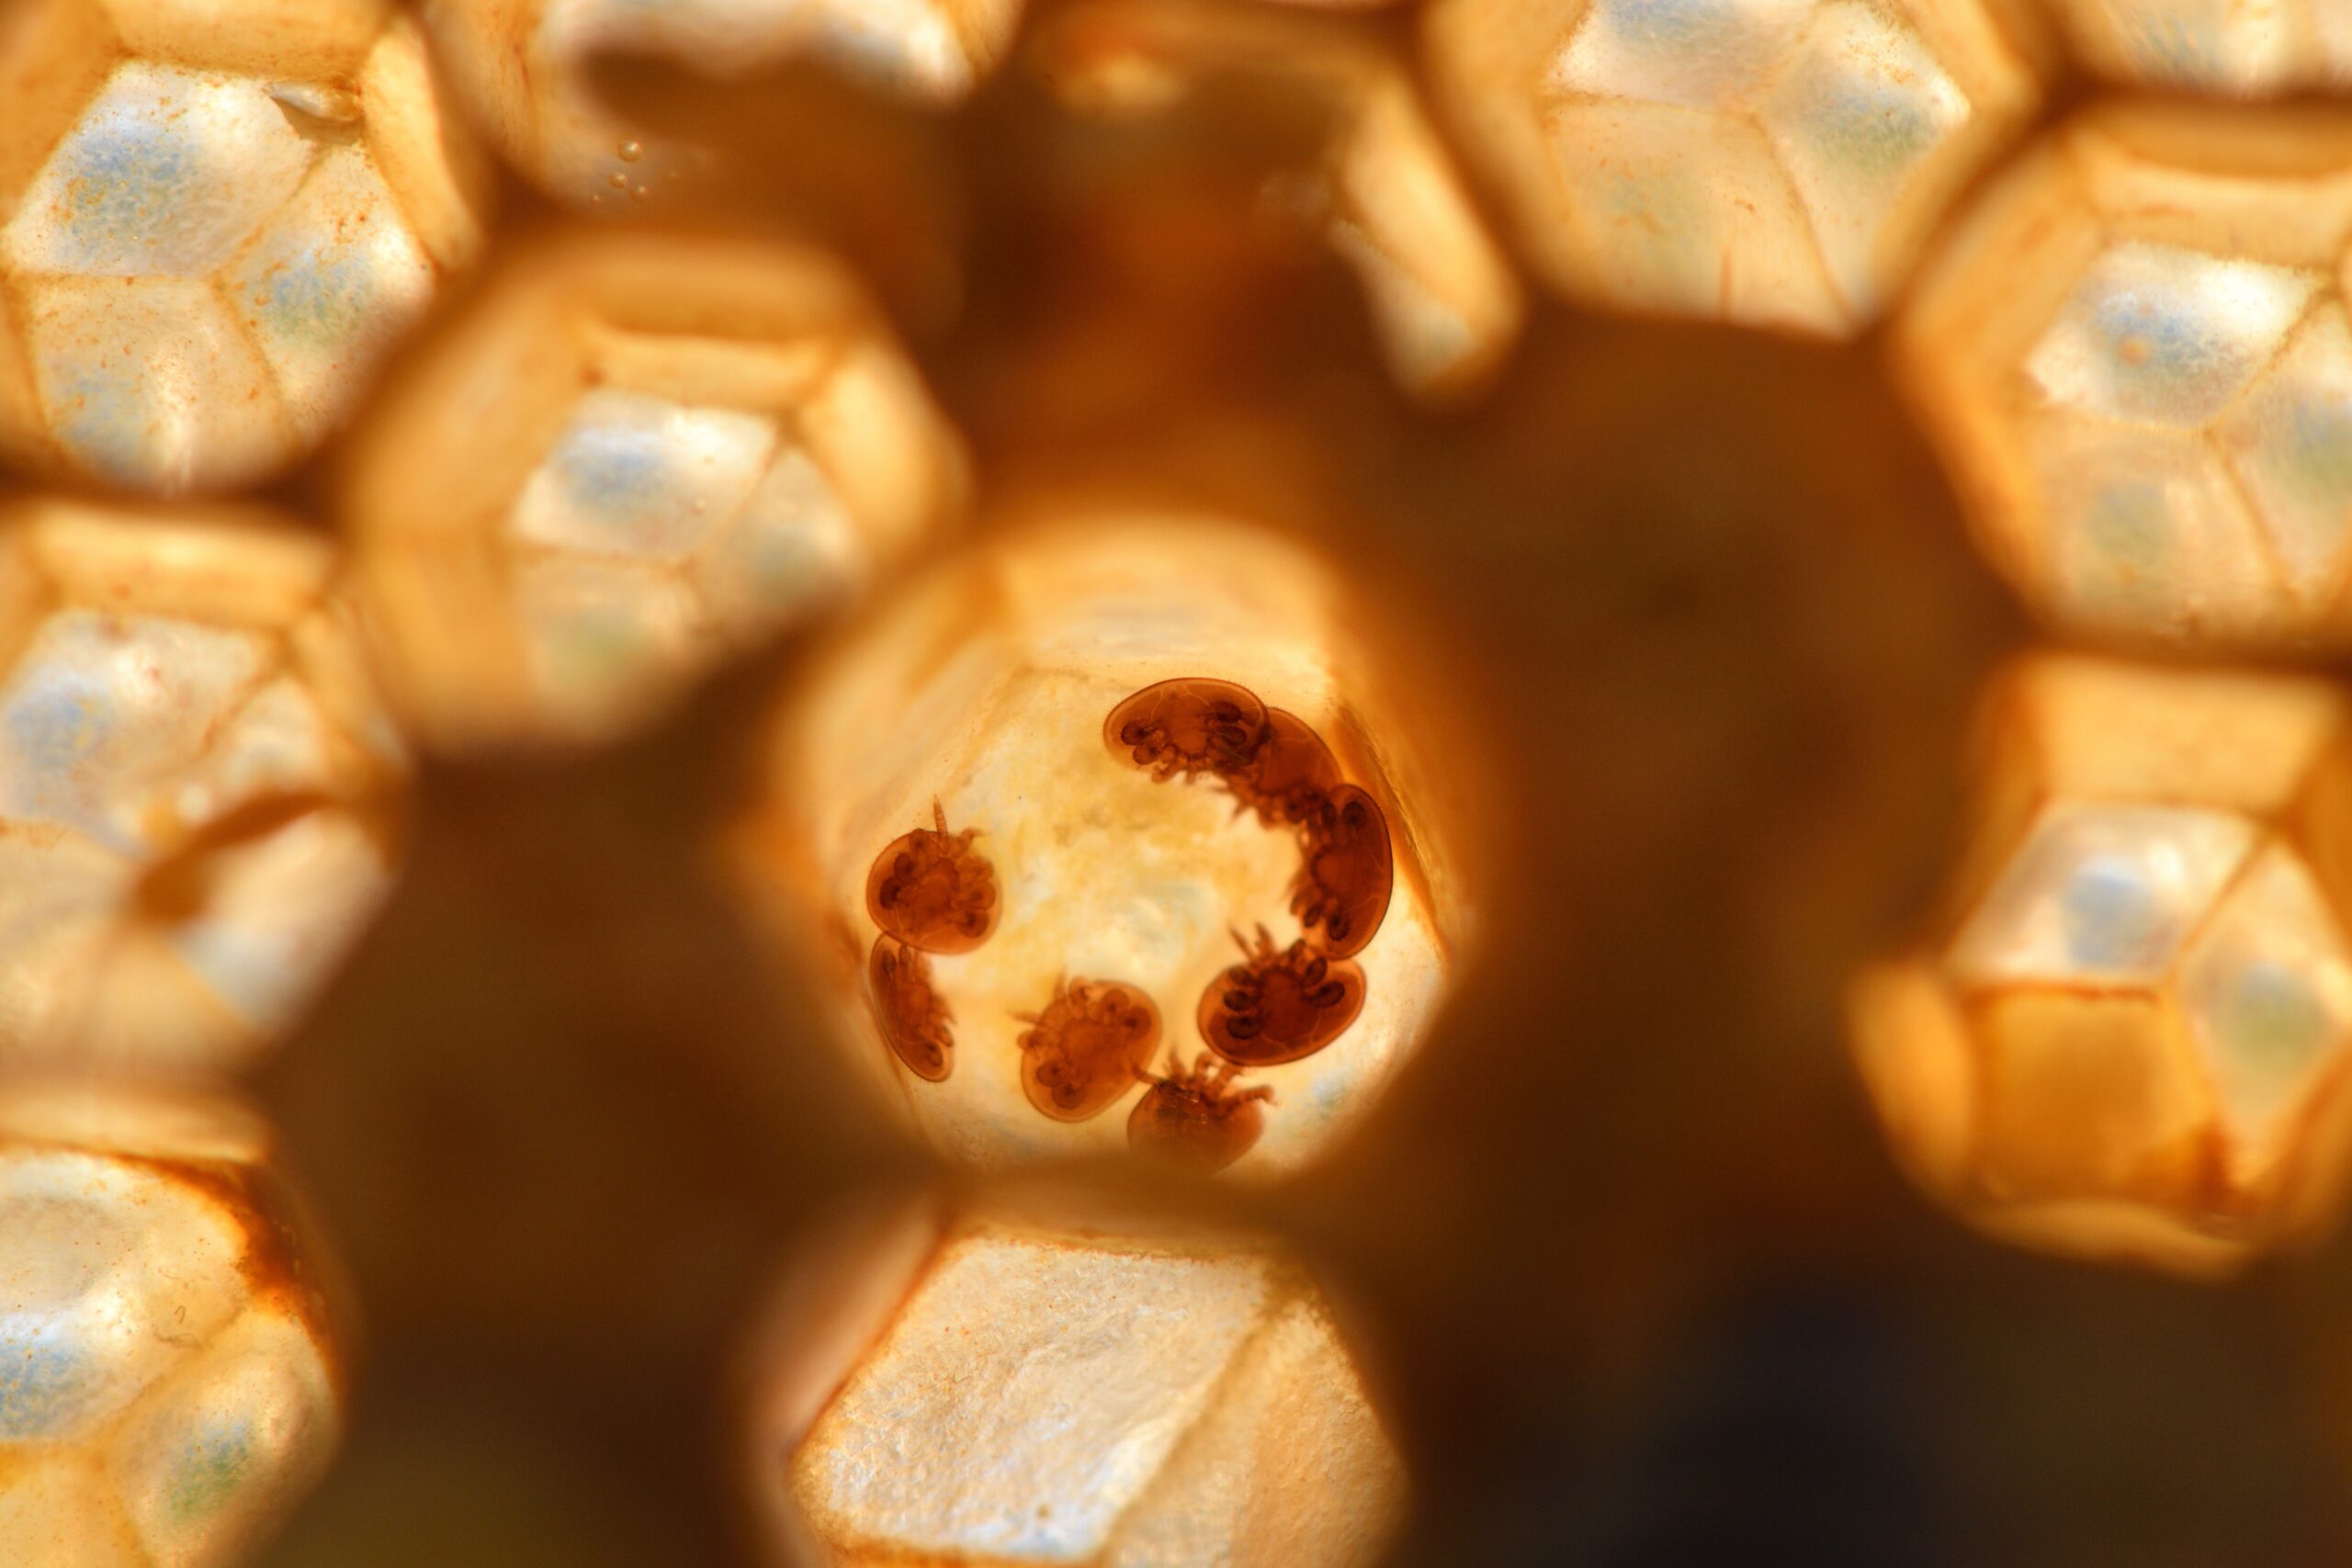 Varroa Destructor mites in a cell